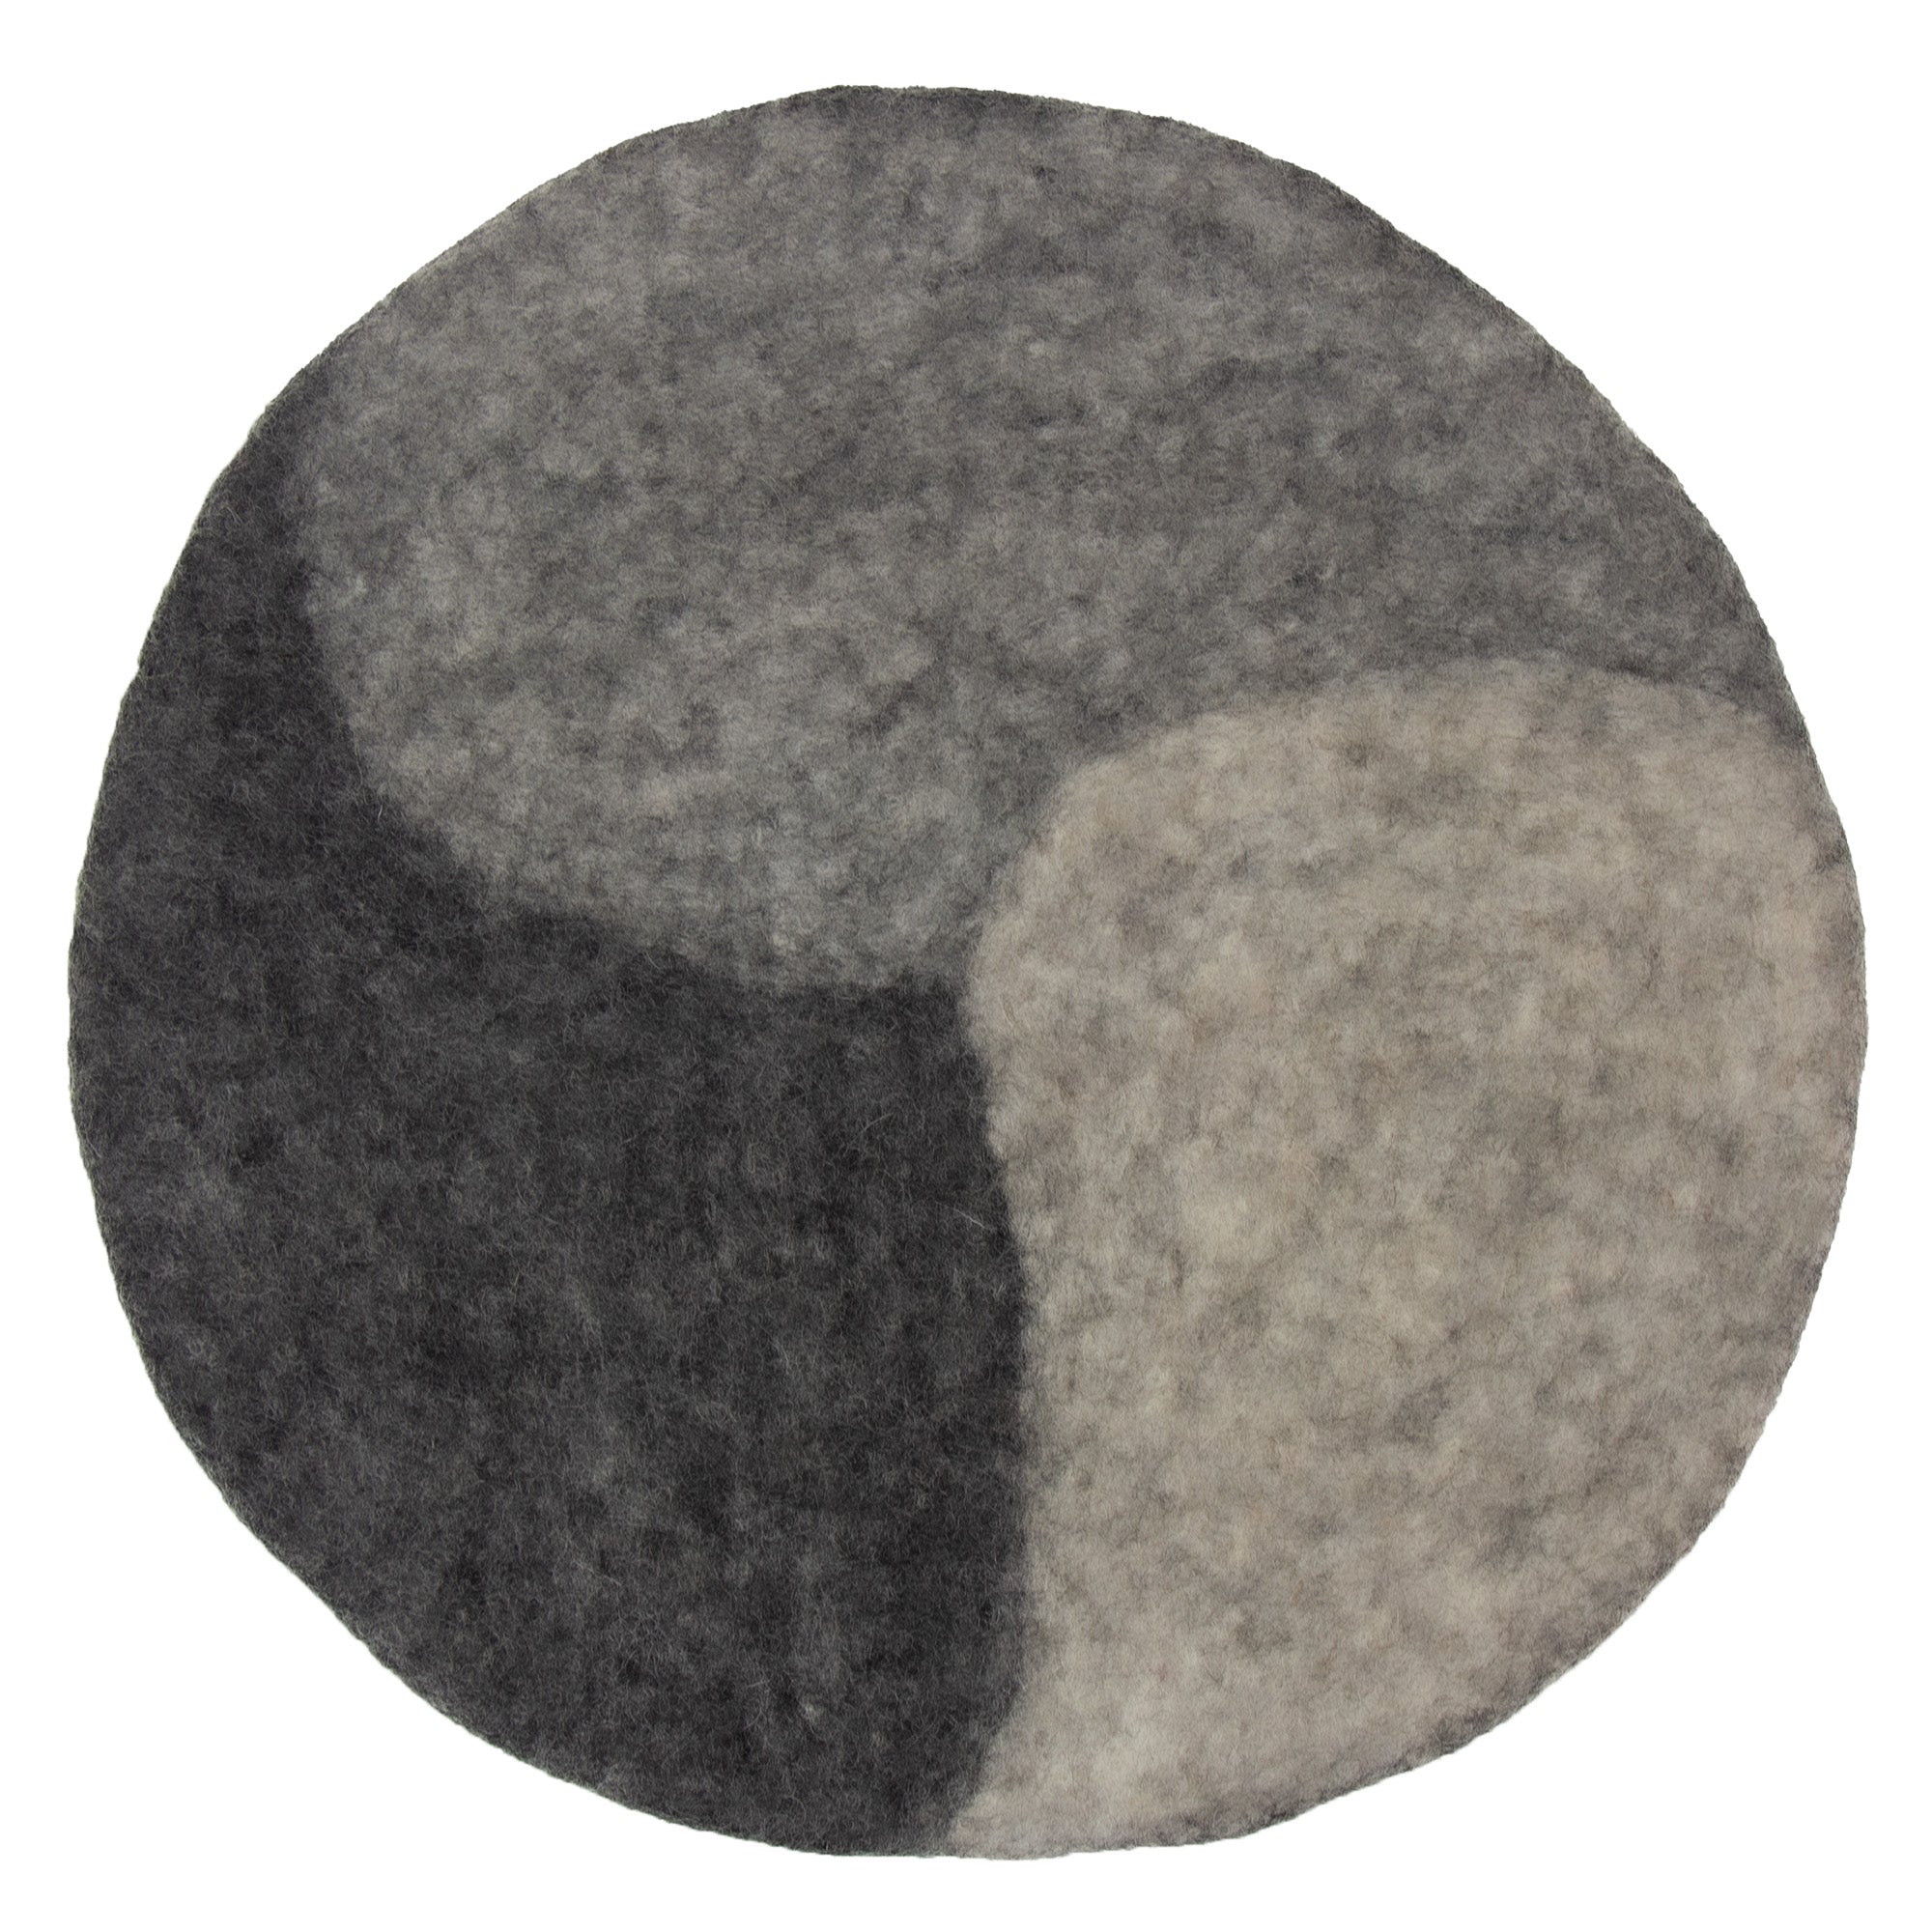 Handmade Felt Paisley 13.75inch Placemat/Charger: Cobblestone